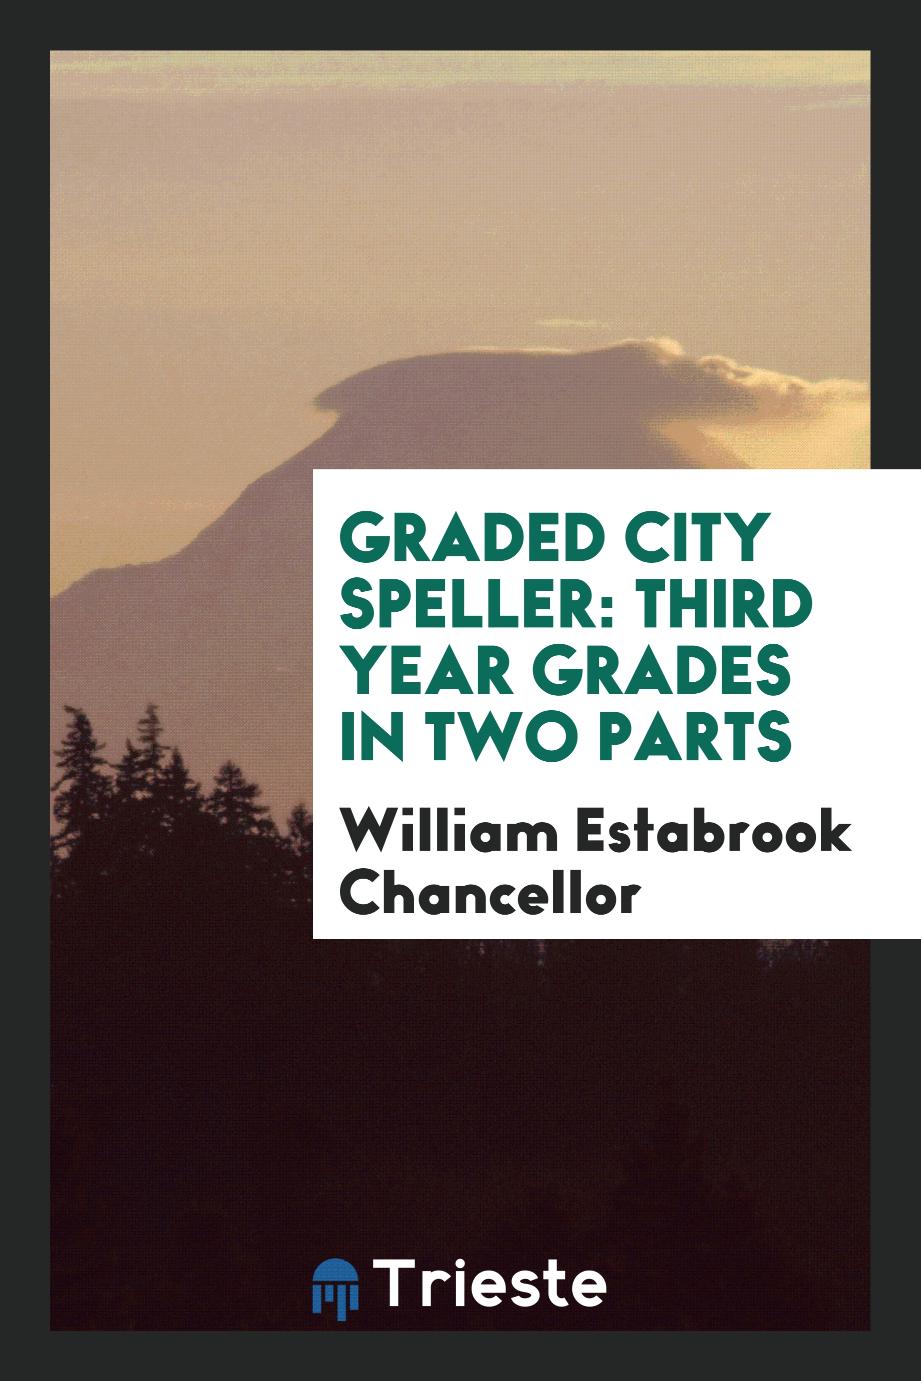 Graded City Speller: Third Year Grades in two parts